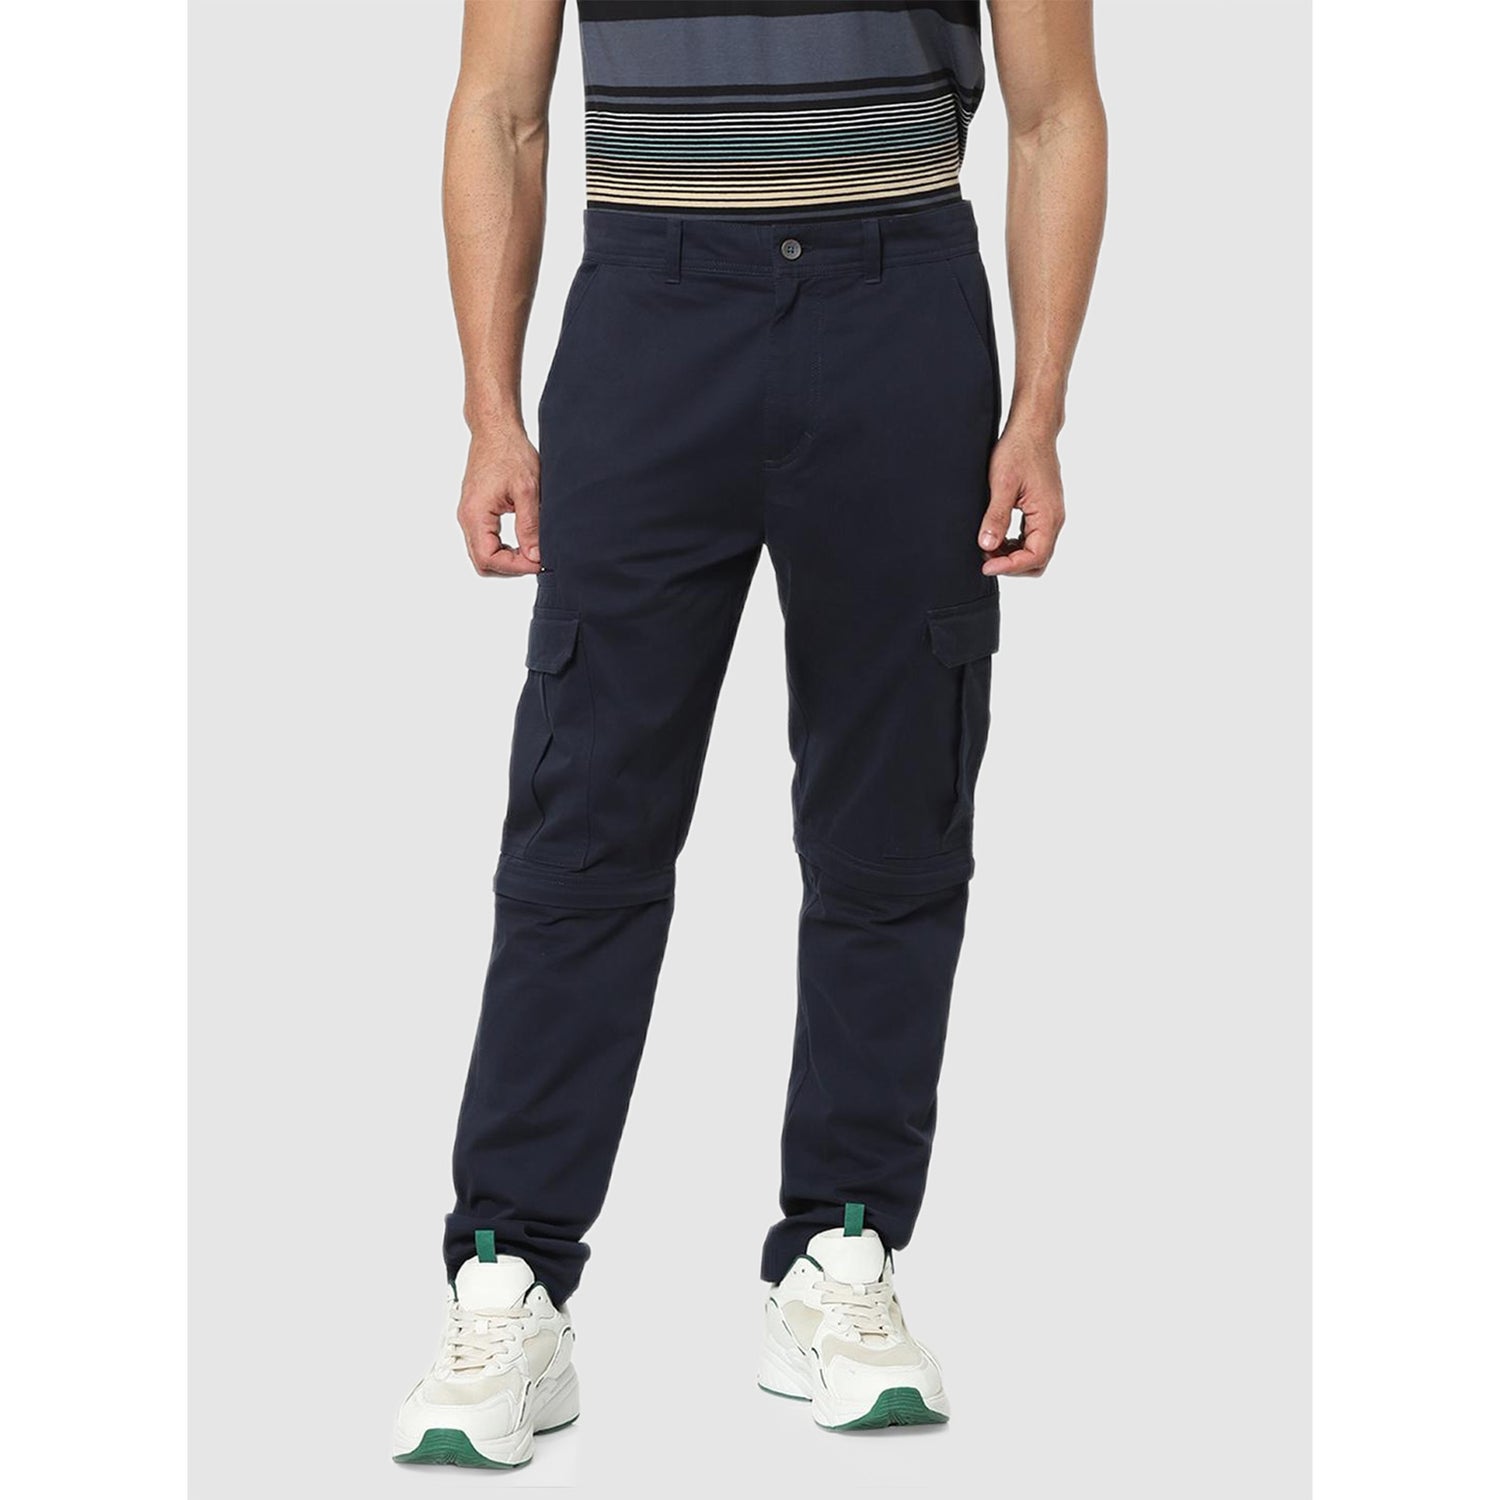 Navy Blue Slim Fit Cotton Chinos Trousers (CODETACH)